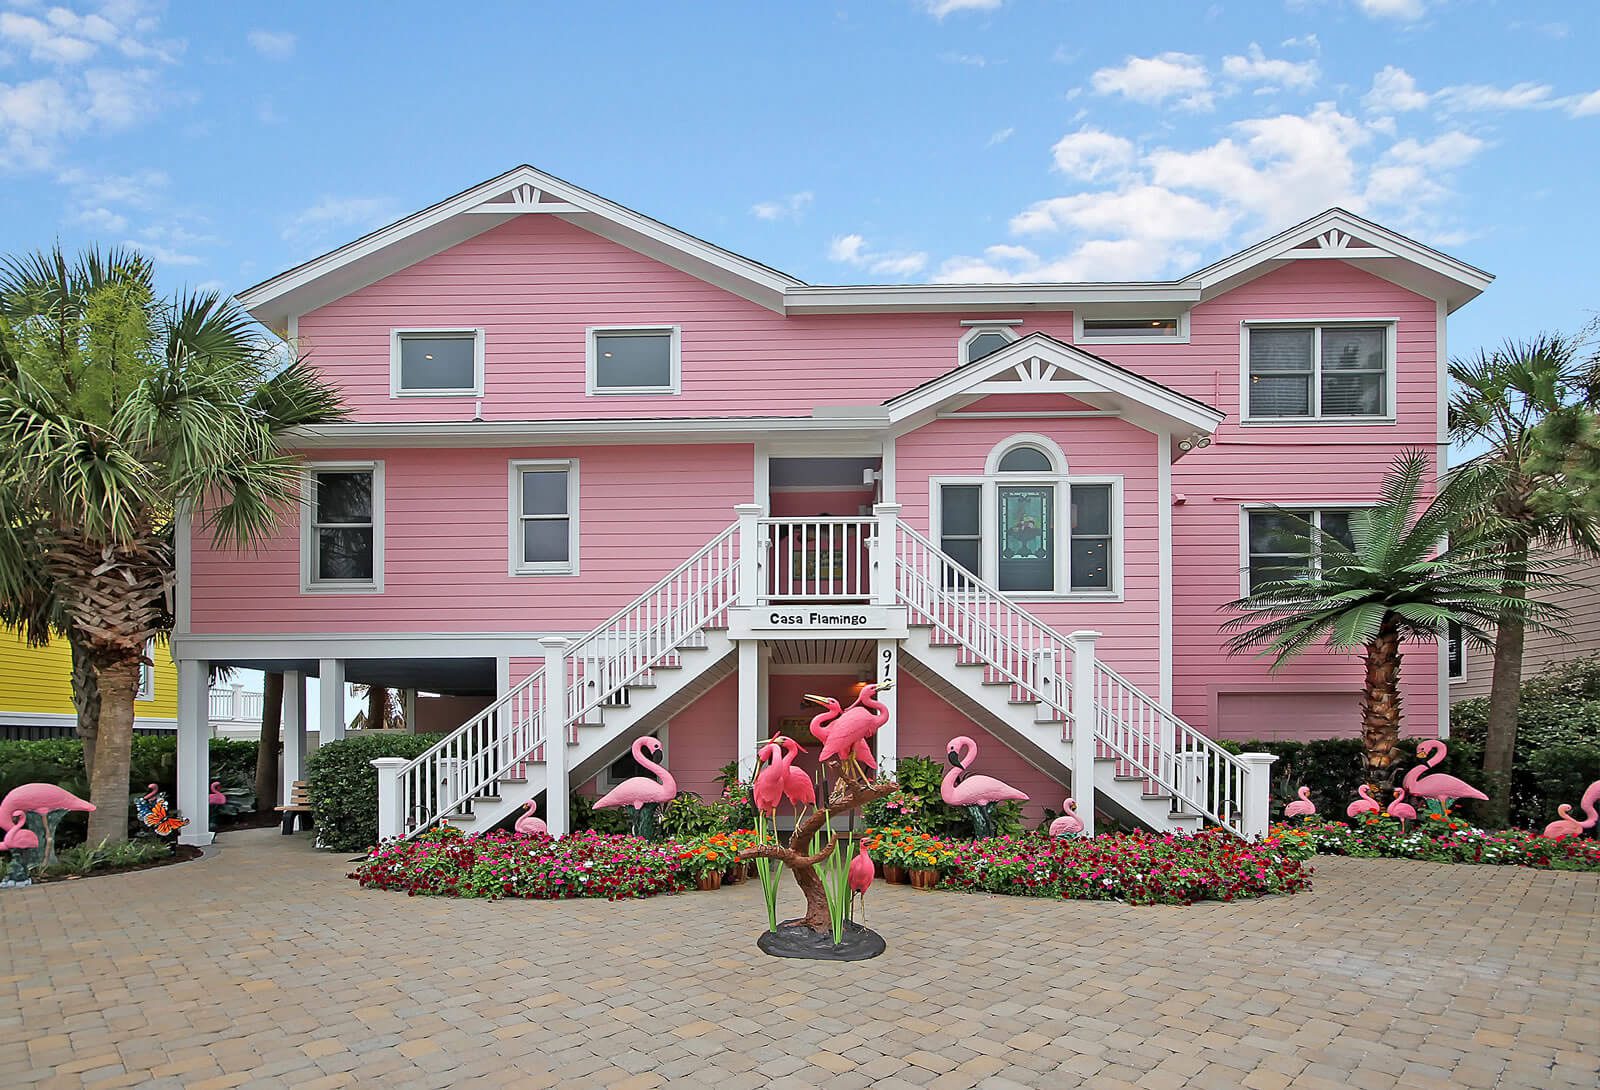 Casa Flamingo Front of Home - Isle of Palms, SC